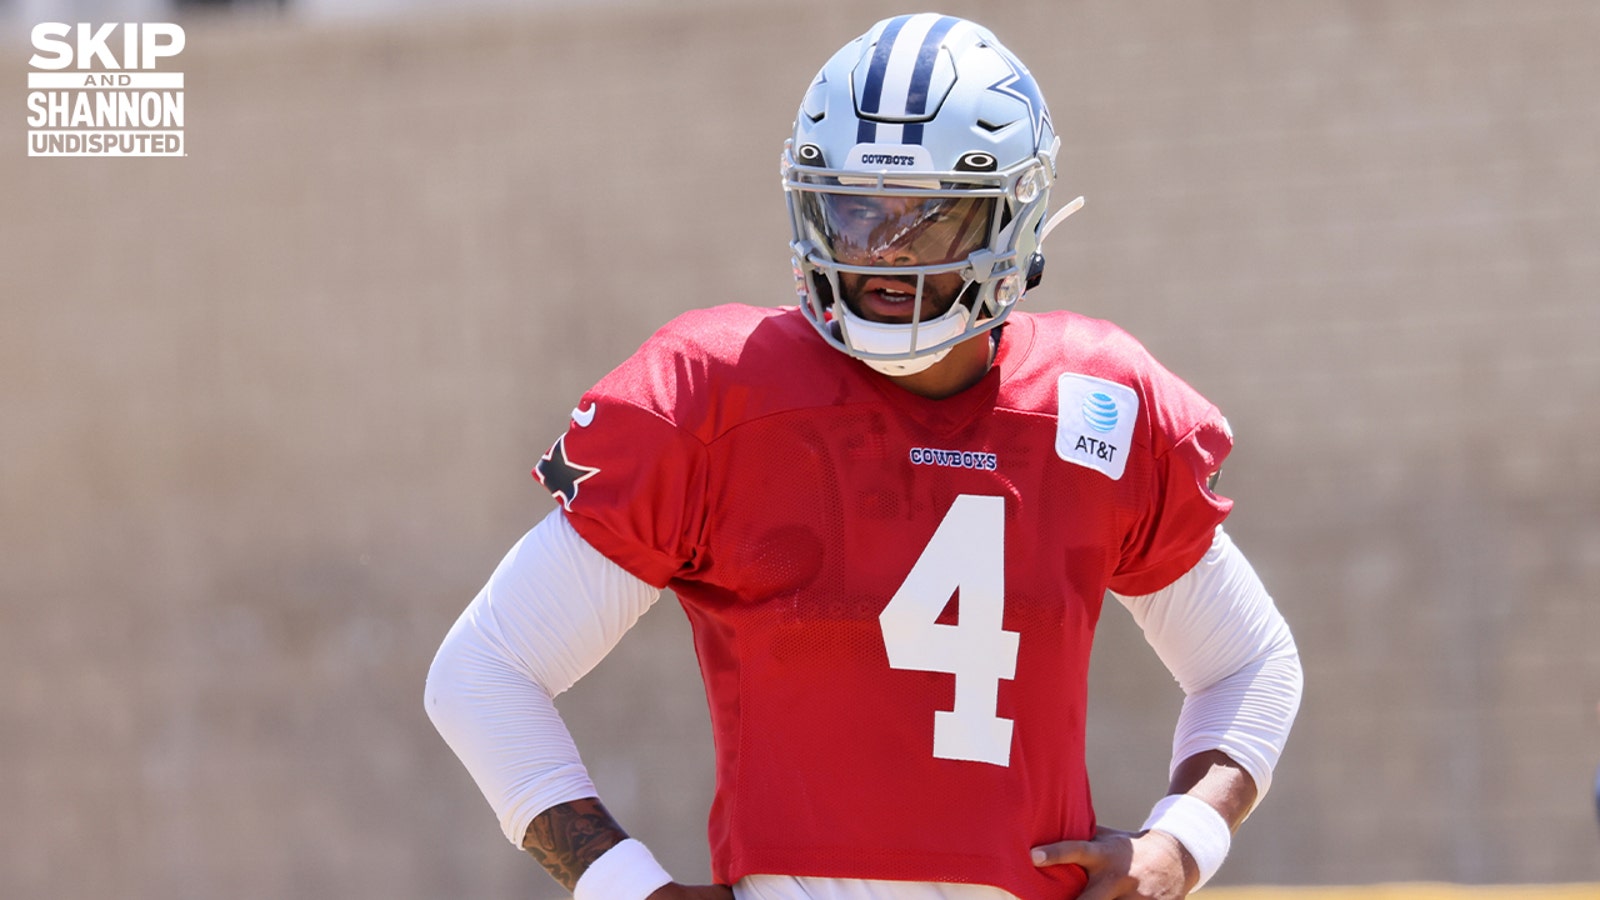 Is Dak Prescott's injury to his surgically repaired ankle involved? 